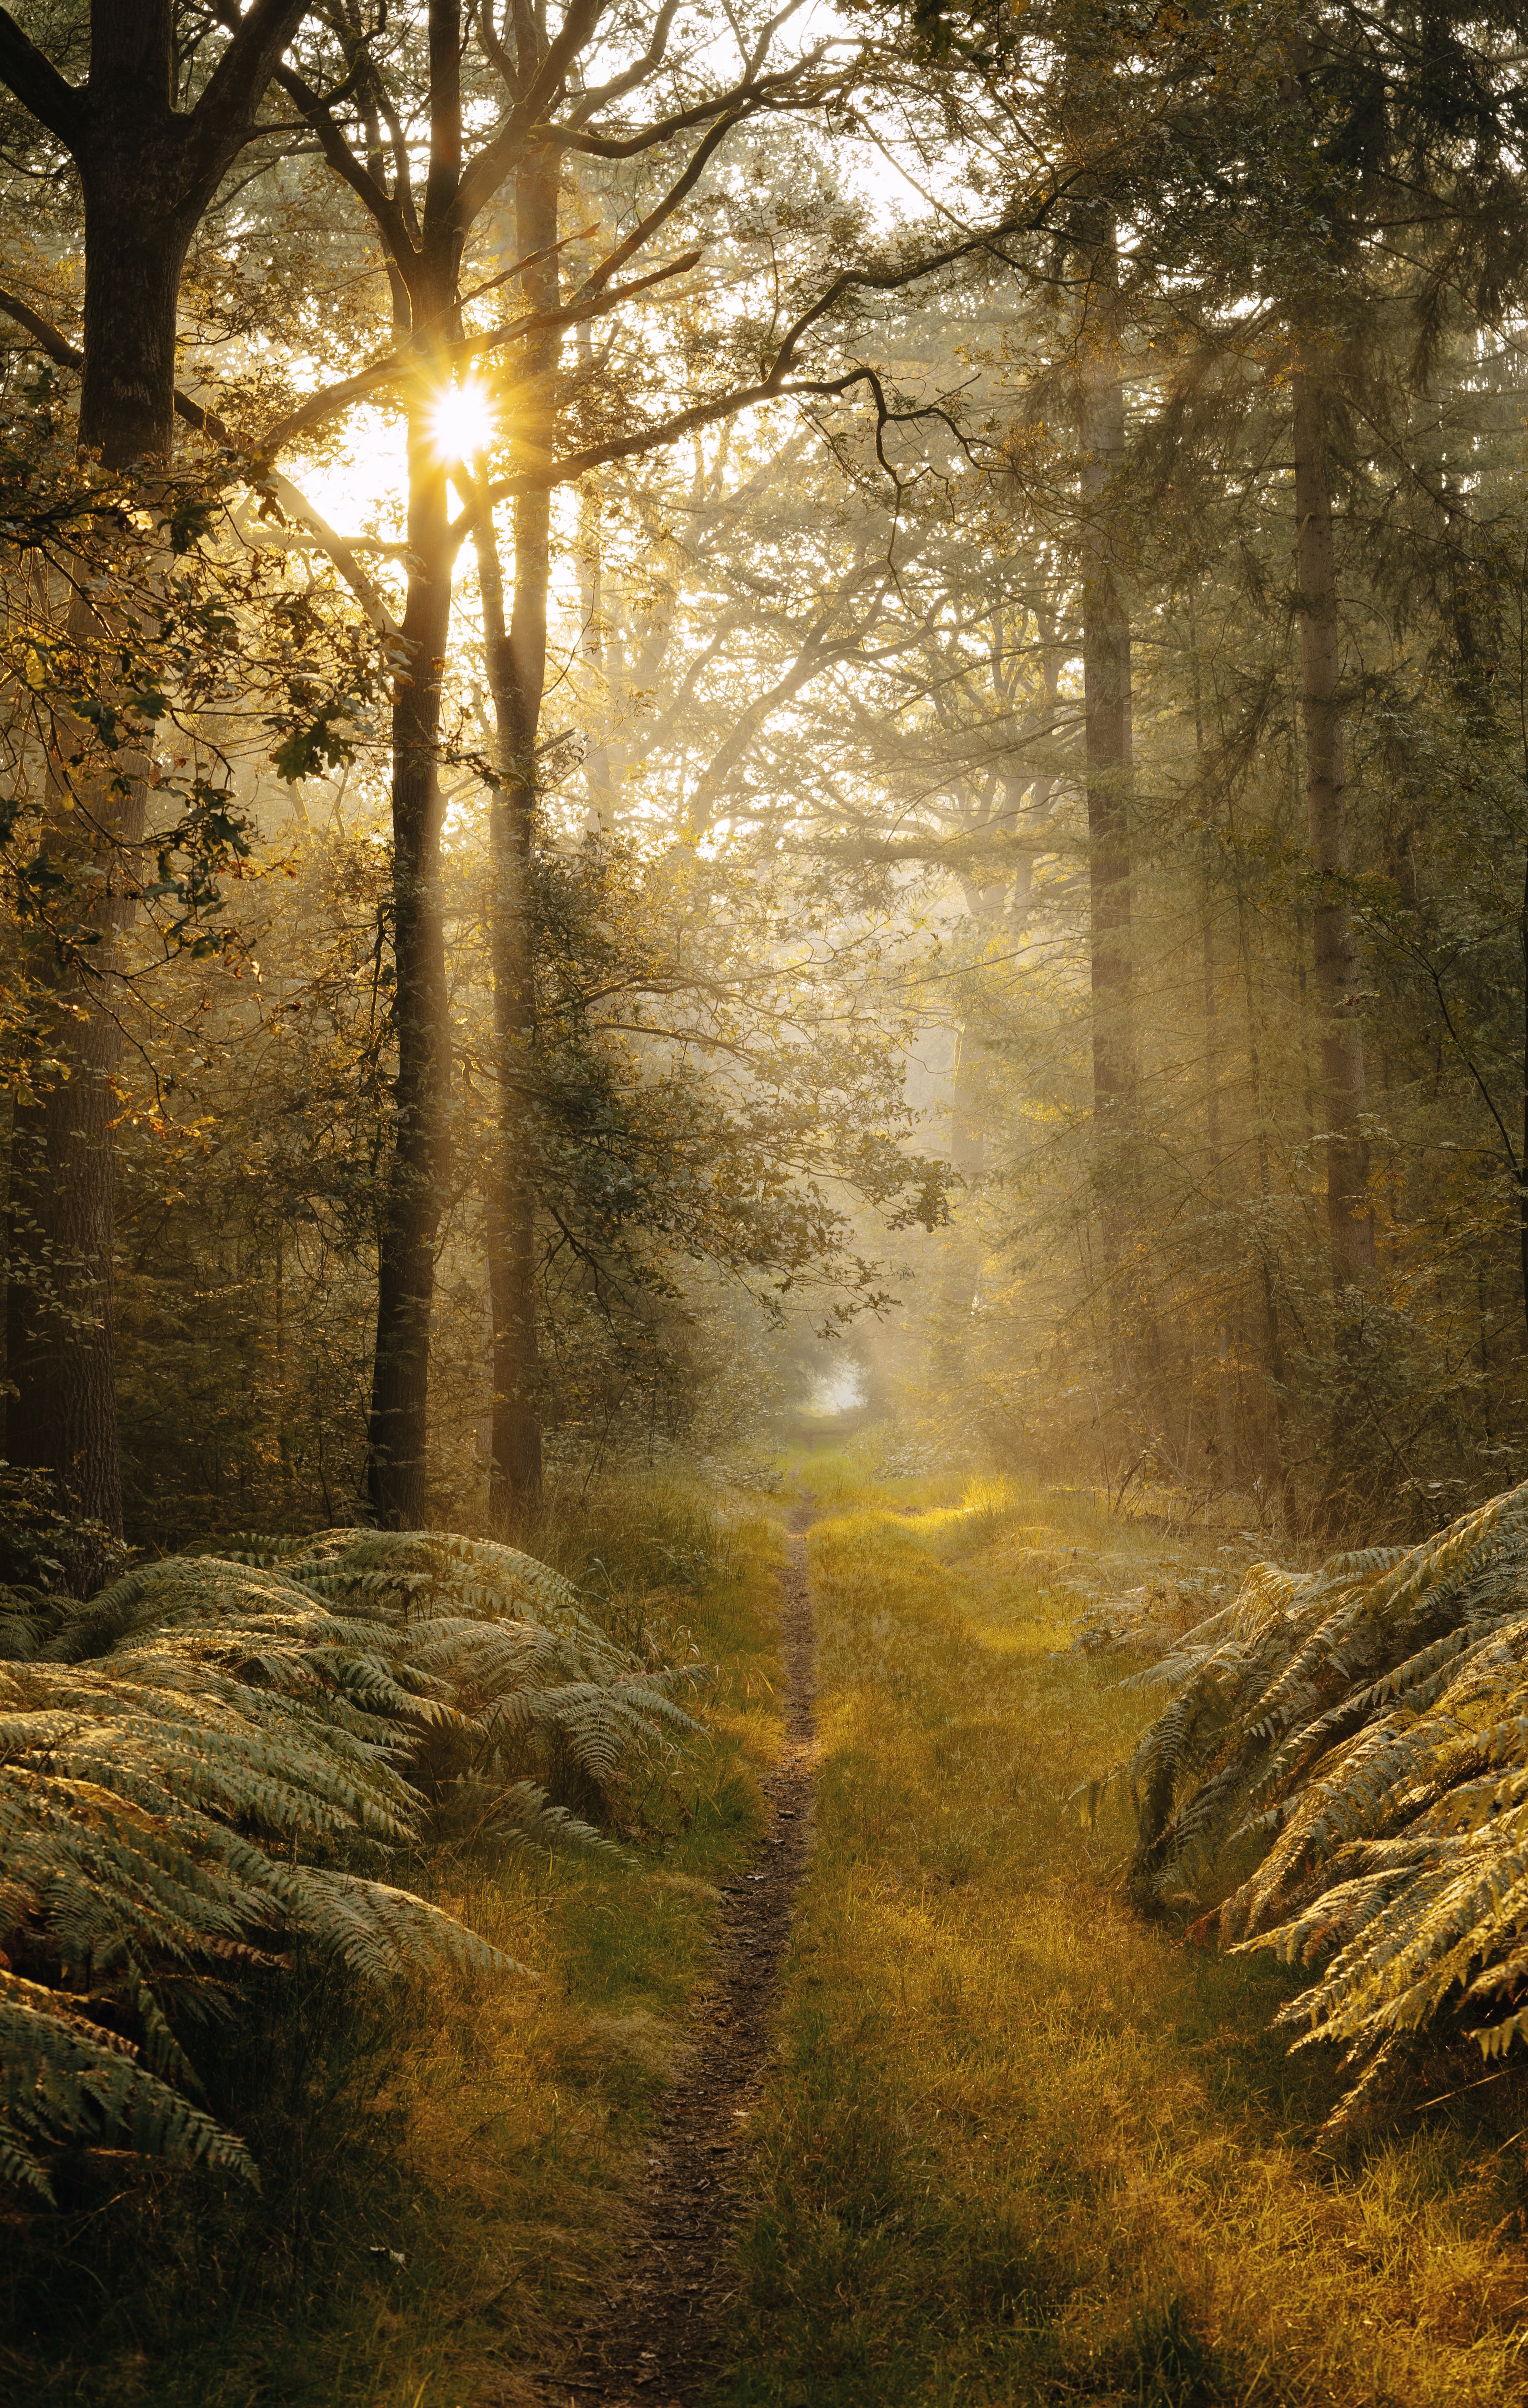 android path, nature, trees, bush, fern, beams, rays